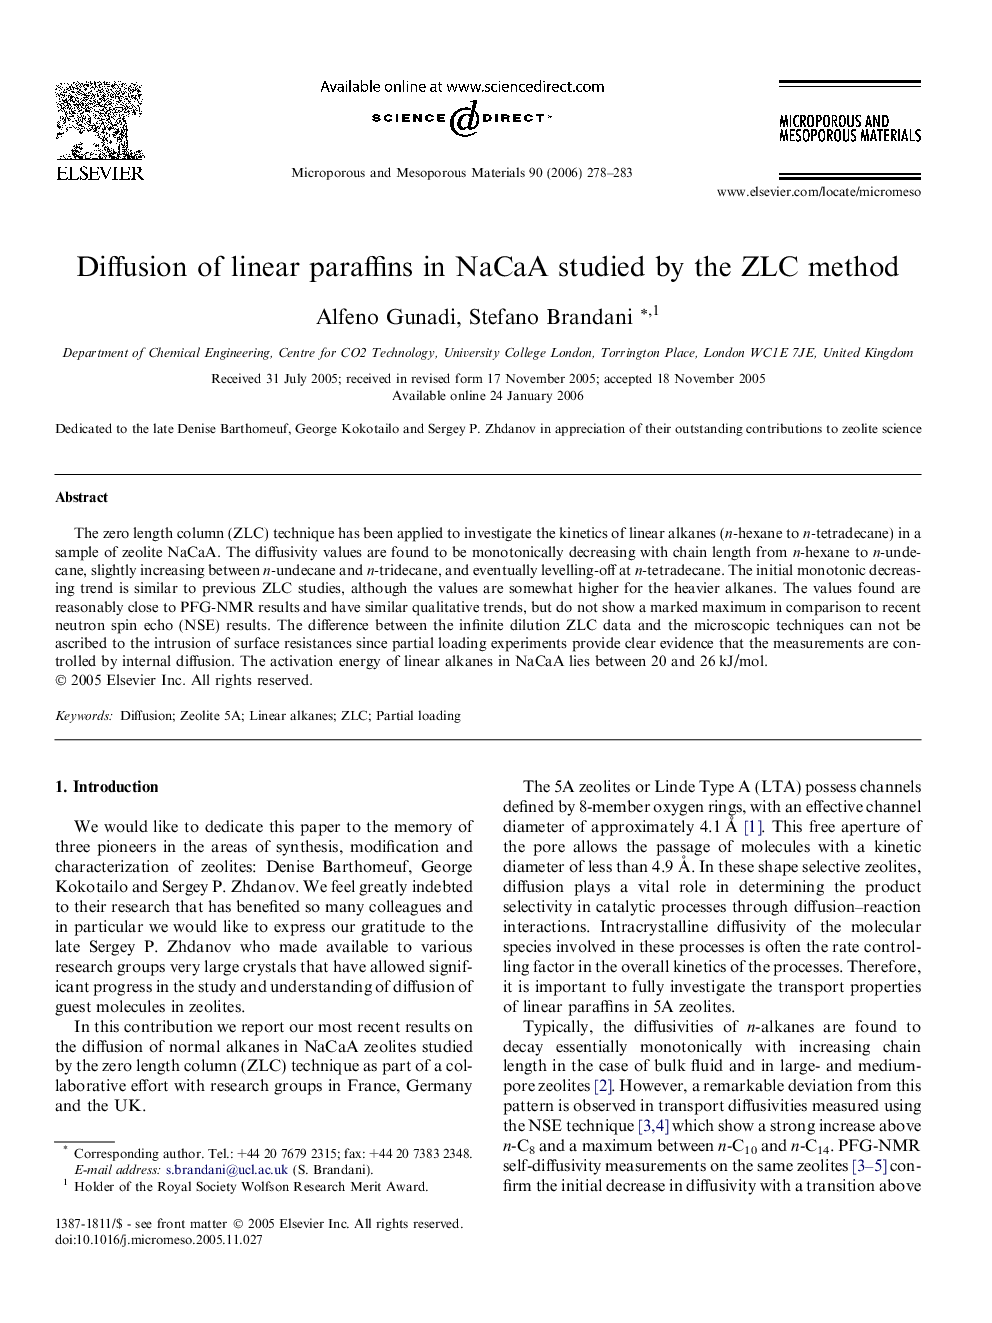 Diffusion of linear paraffins in NaCaA studied by the ZLC method